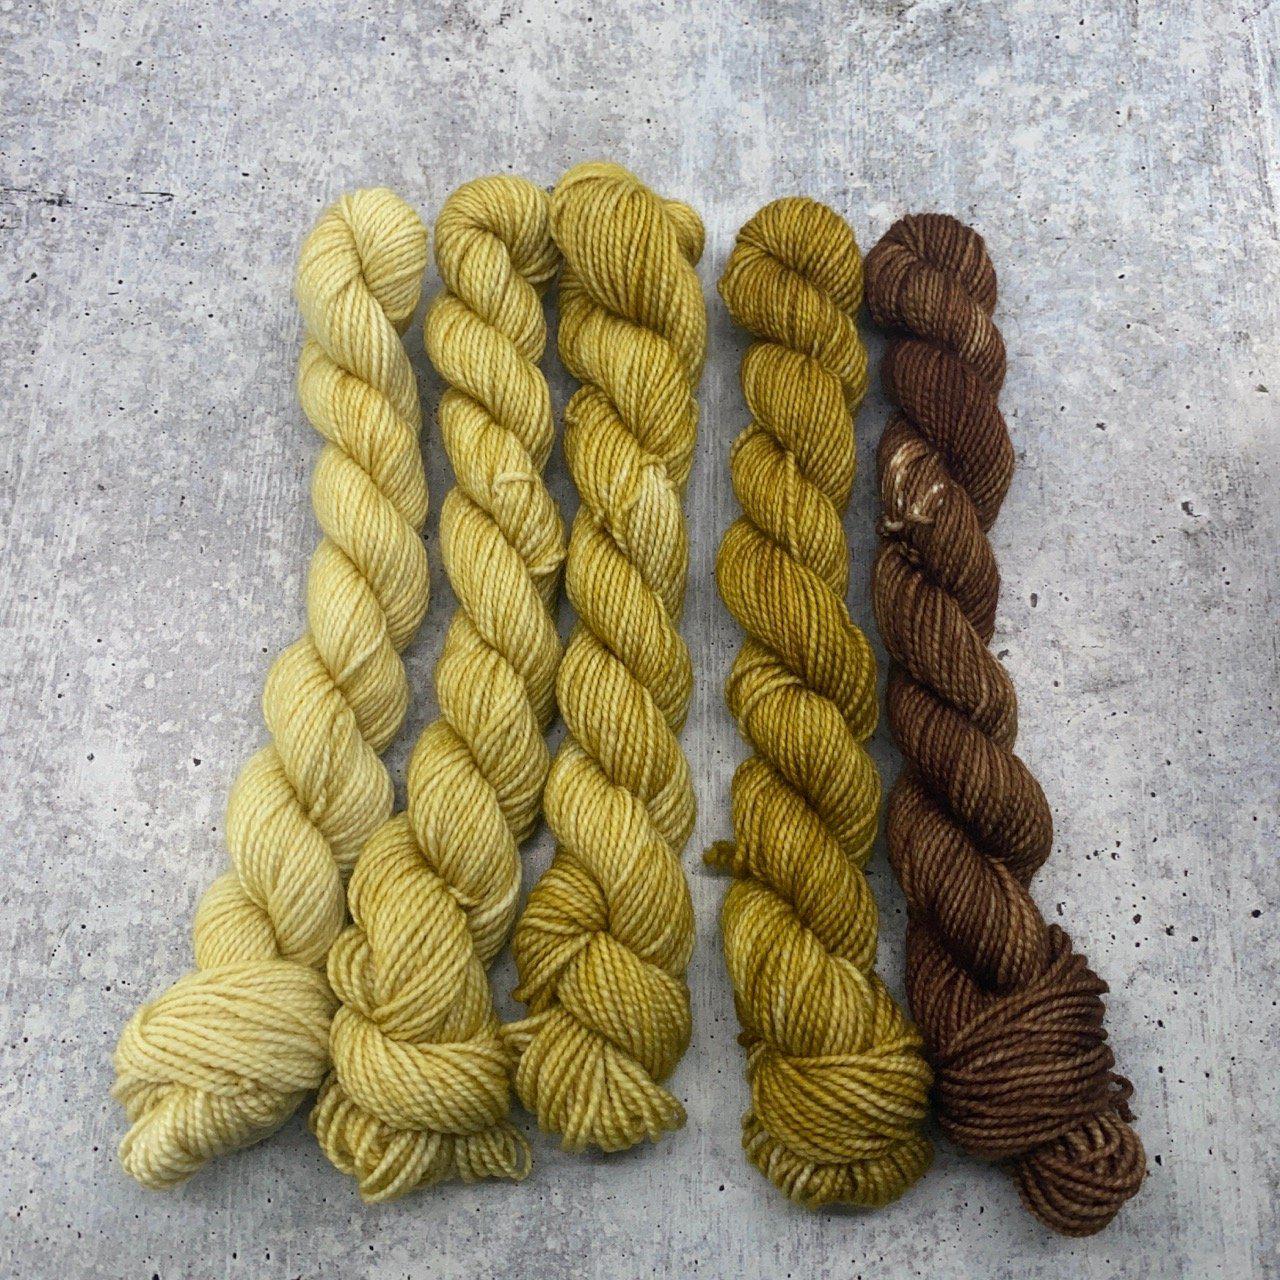 Side to Side 7 Blue and Tan Yarn Mirrored Gradient Yarn Repeat